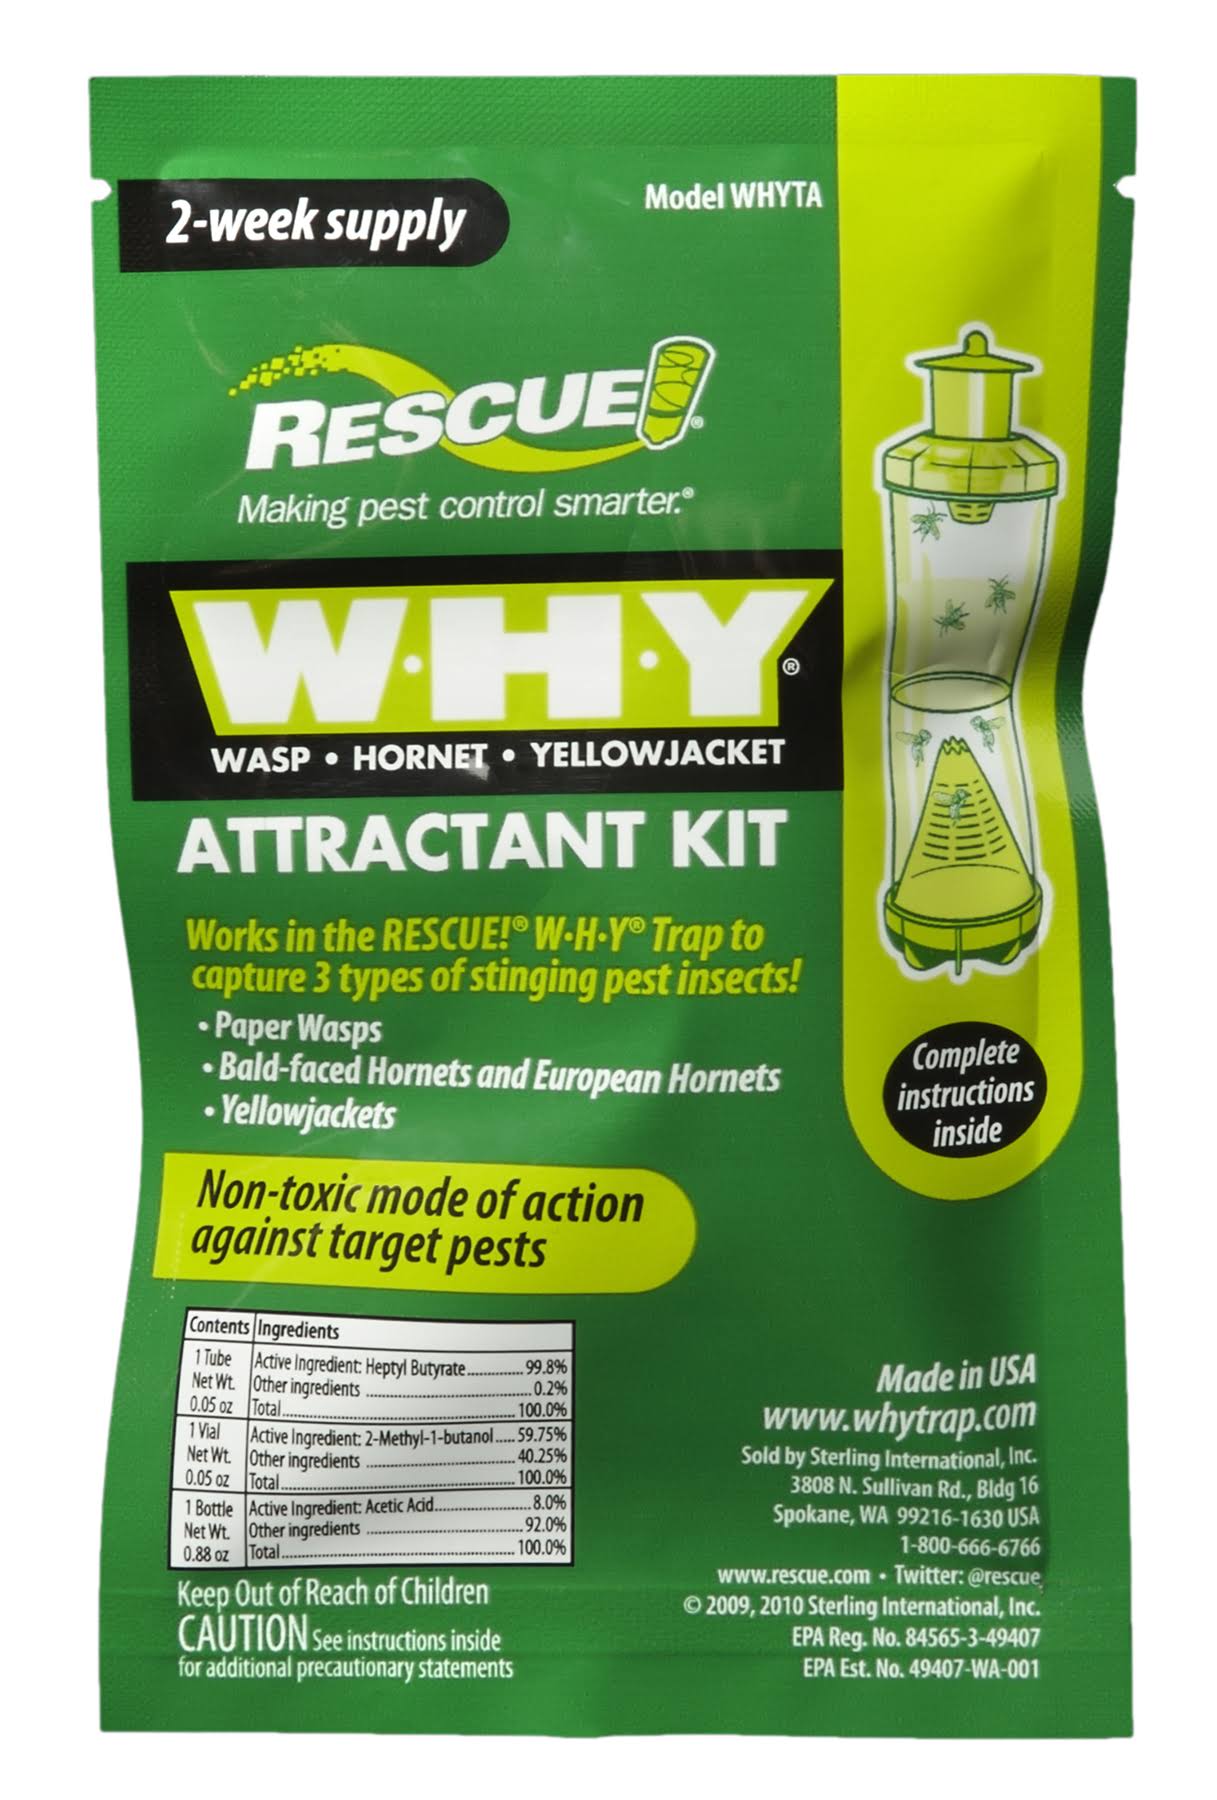 RESCUE WHY: Wasp, Hornet, Yellowjacket Attractant Kit